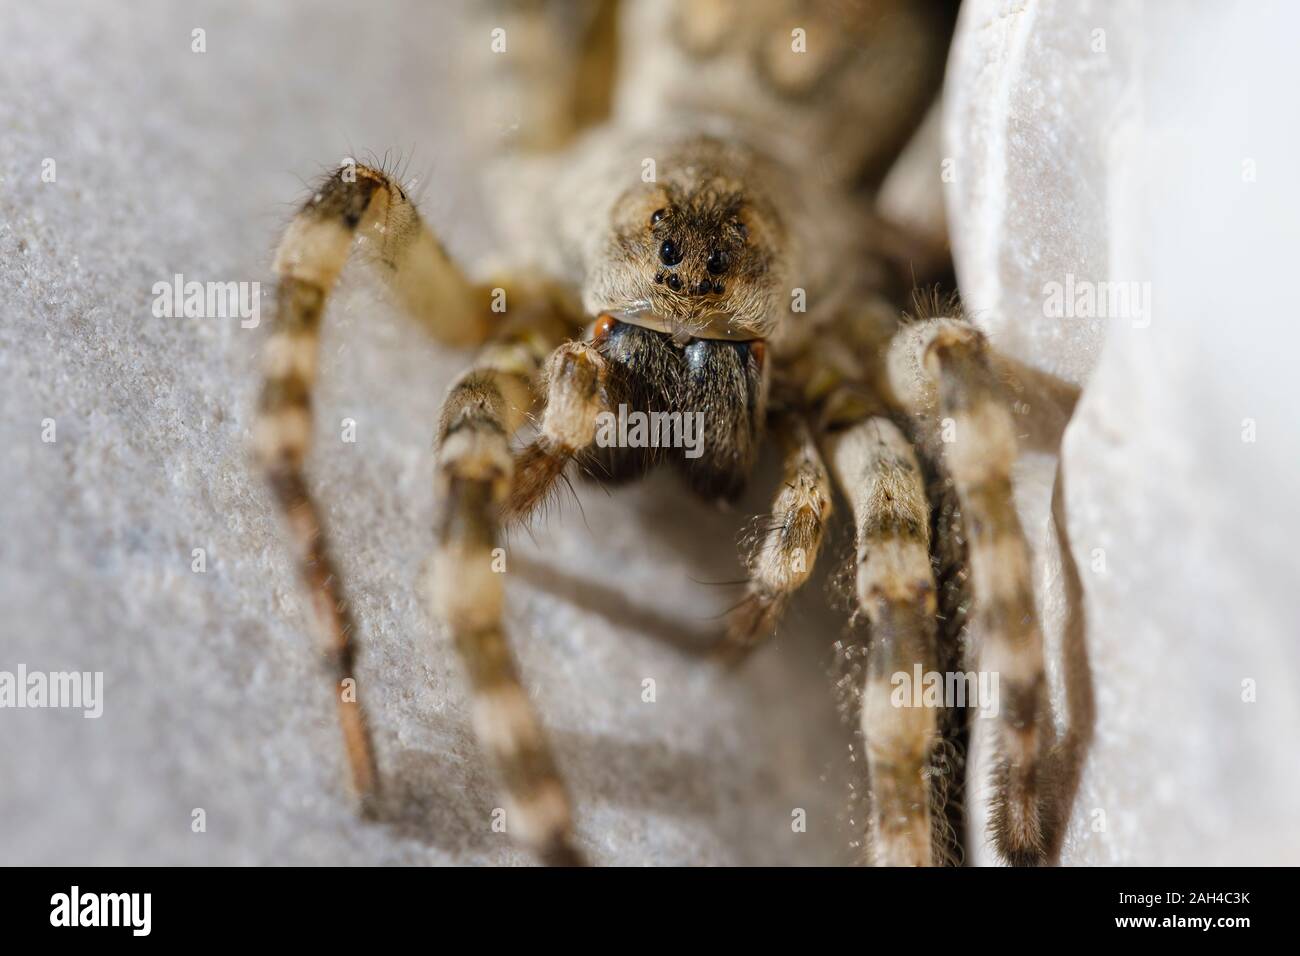 Germany, Bavaria, Geretsried, Portrait of wolf spider (Arctosa maculata) looking straight at camera Stock Photo